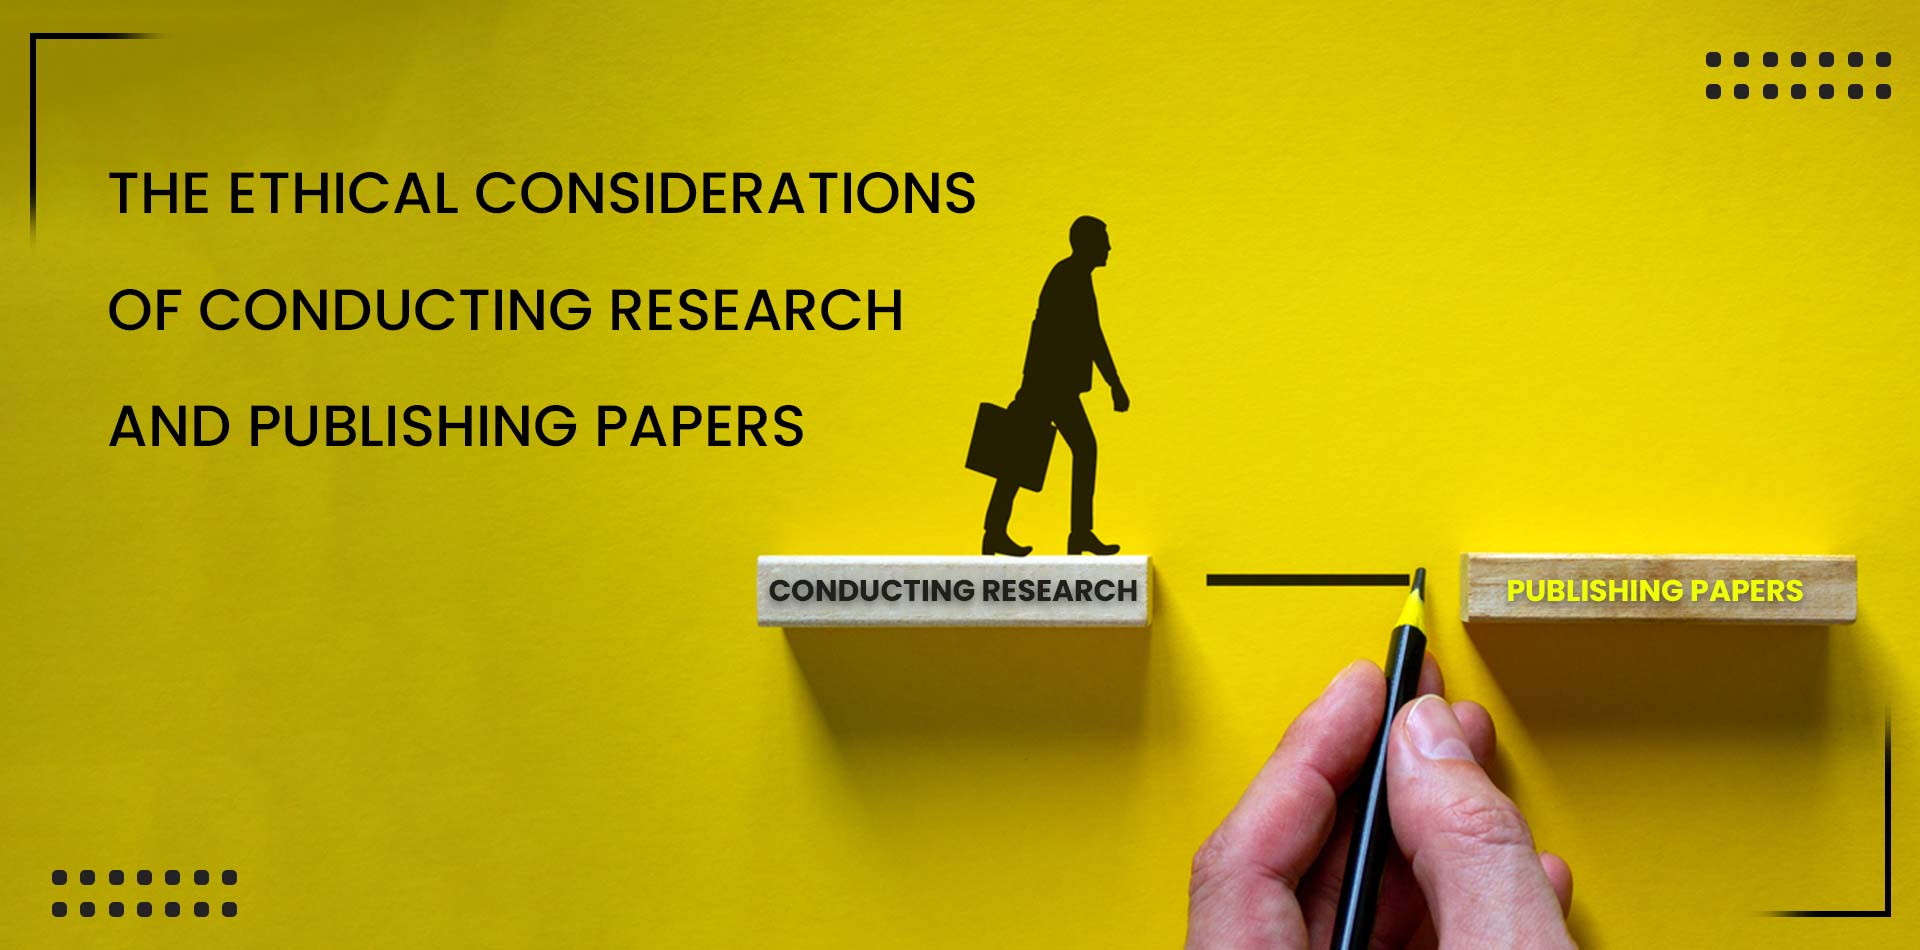 Ethical considerations of conducting research and publishing papers